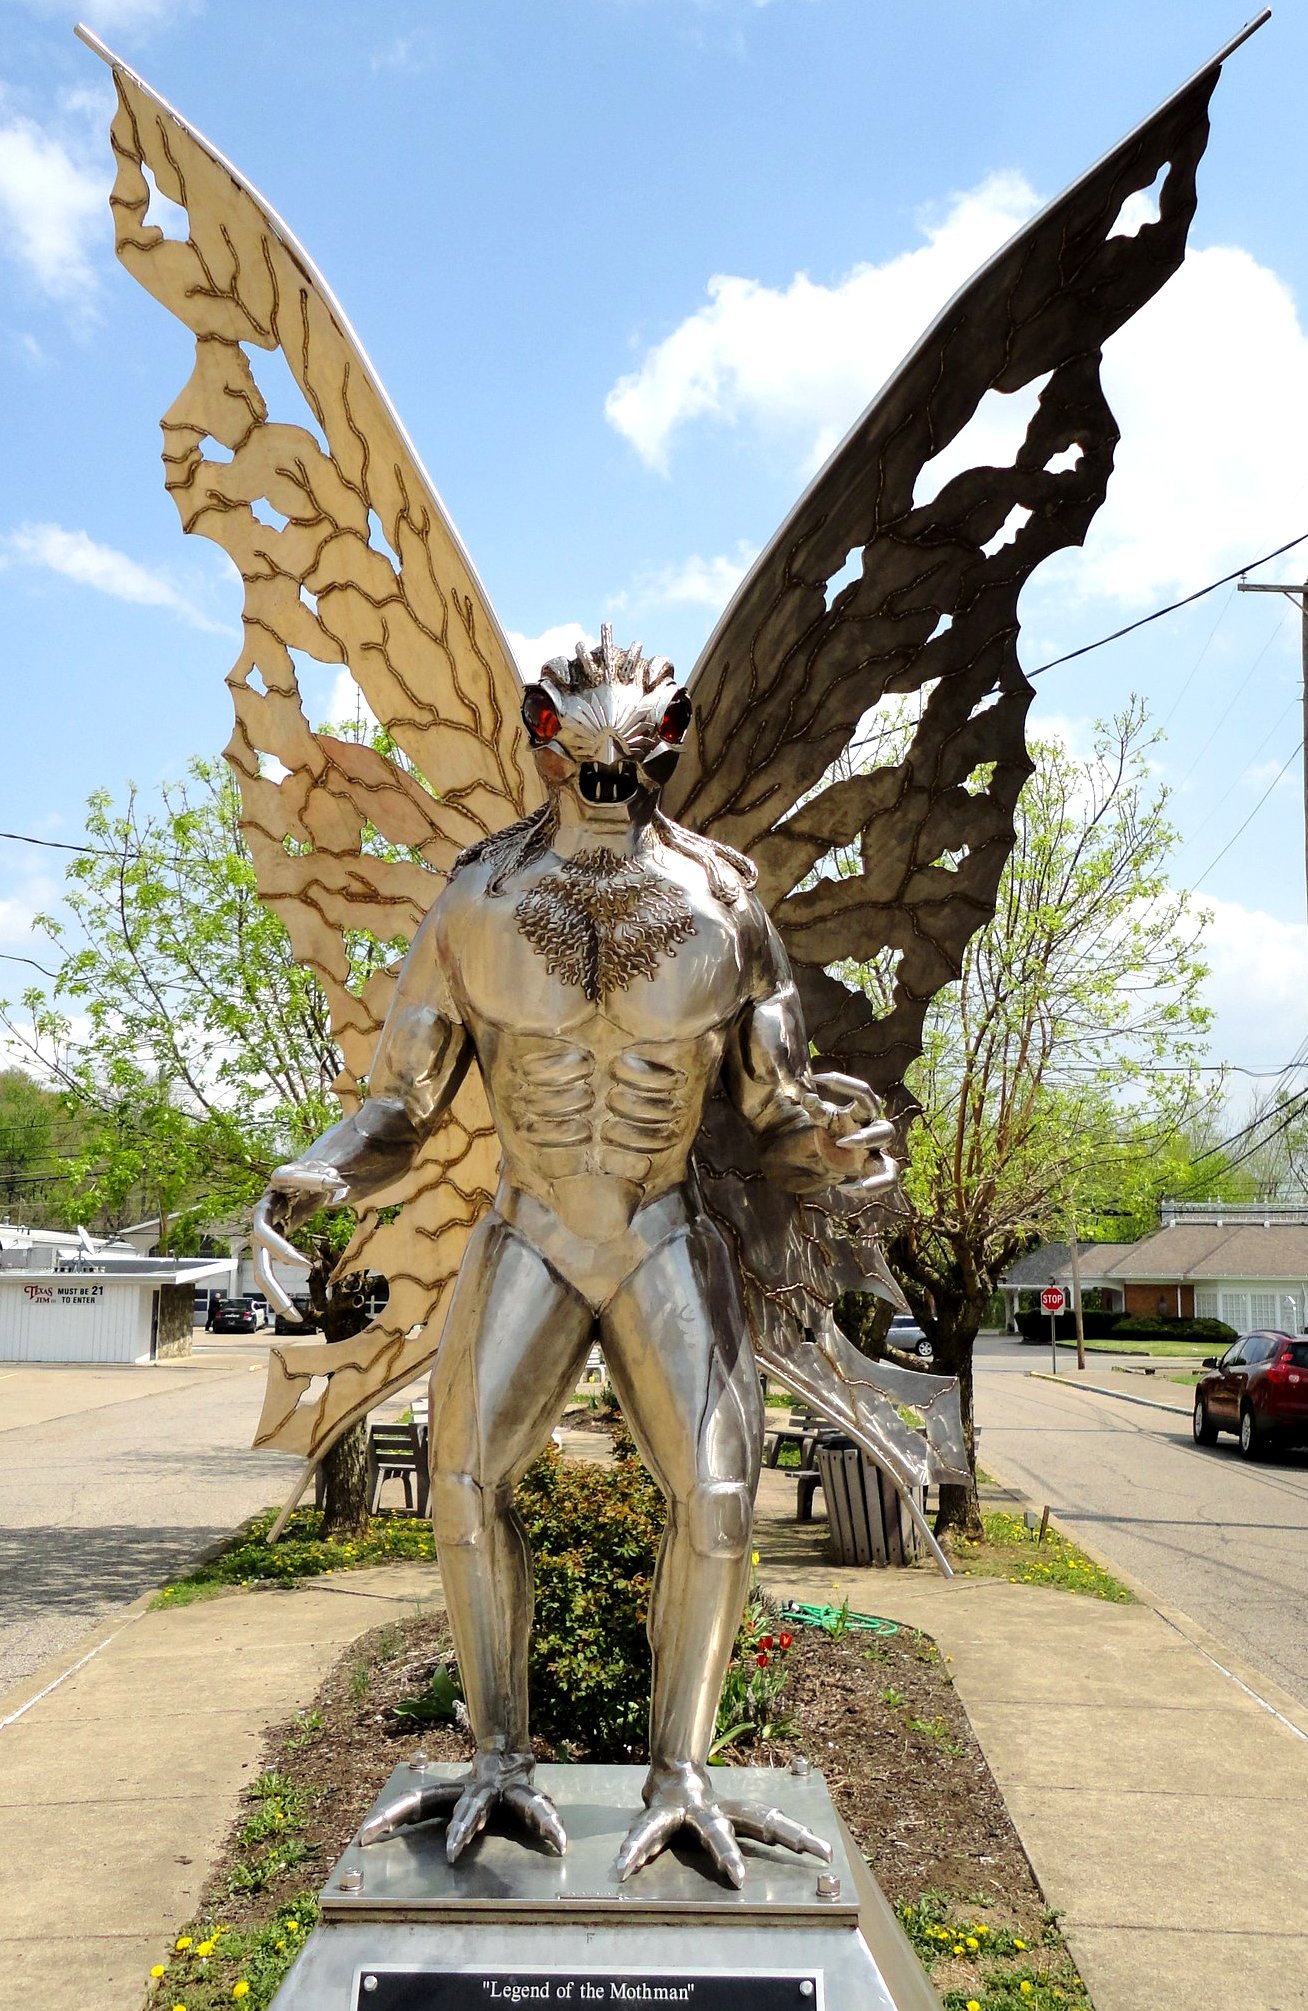 A photo of a metal statue of a winged creature with a humanoid body and a dragon-like head, standing on a pedestal with a plaque that reads "Legend of the Mothman". The background is a street with trees and buildings and a blue sky with clouds.